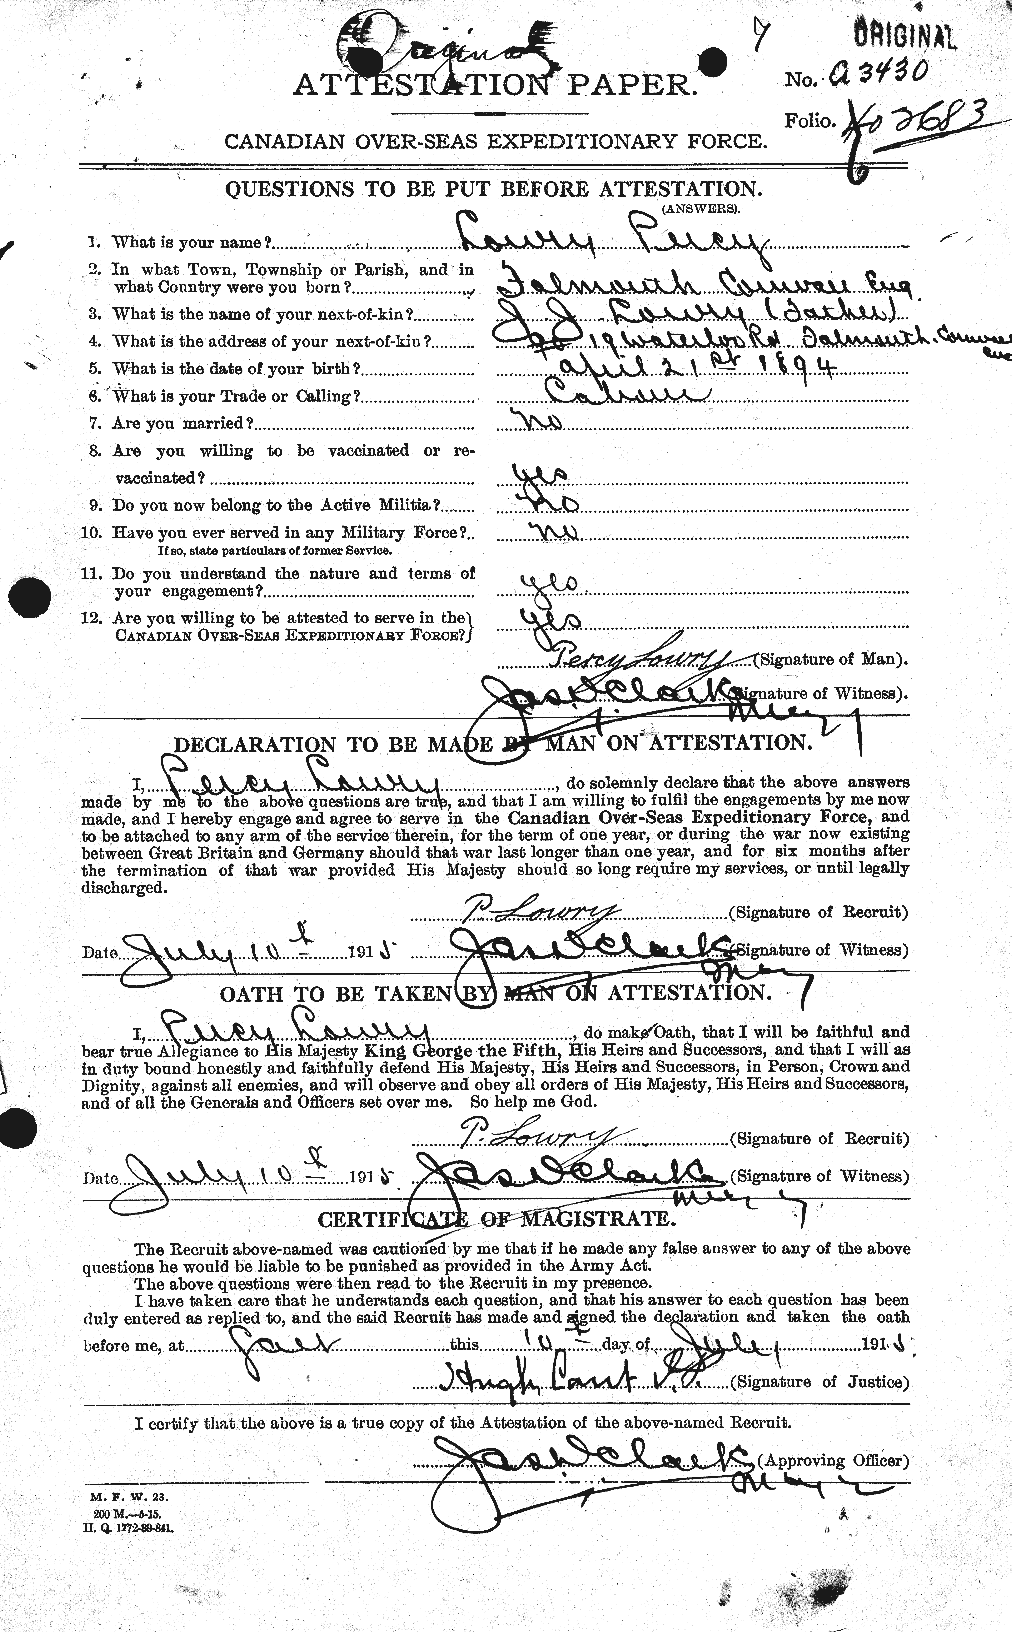 Personnel Records of the First World War - CEF 474001a